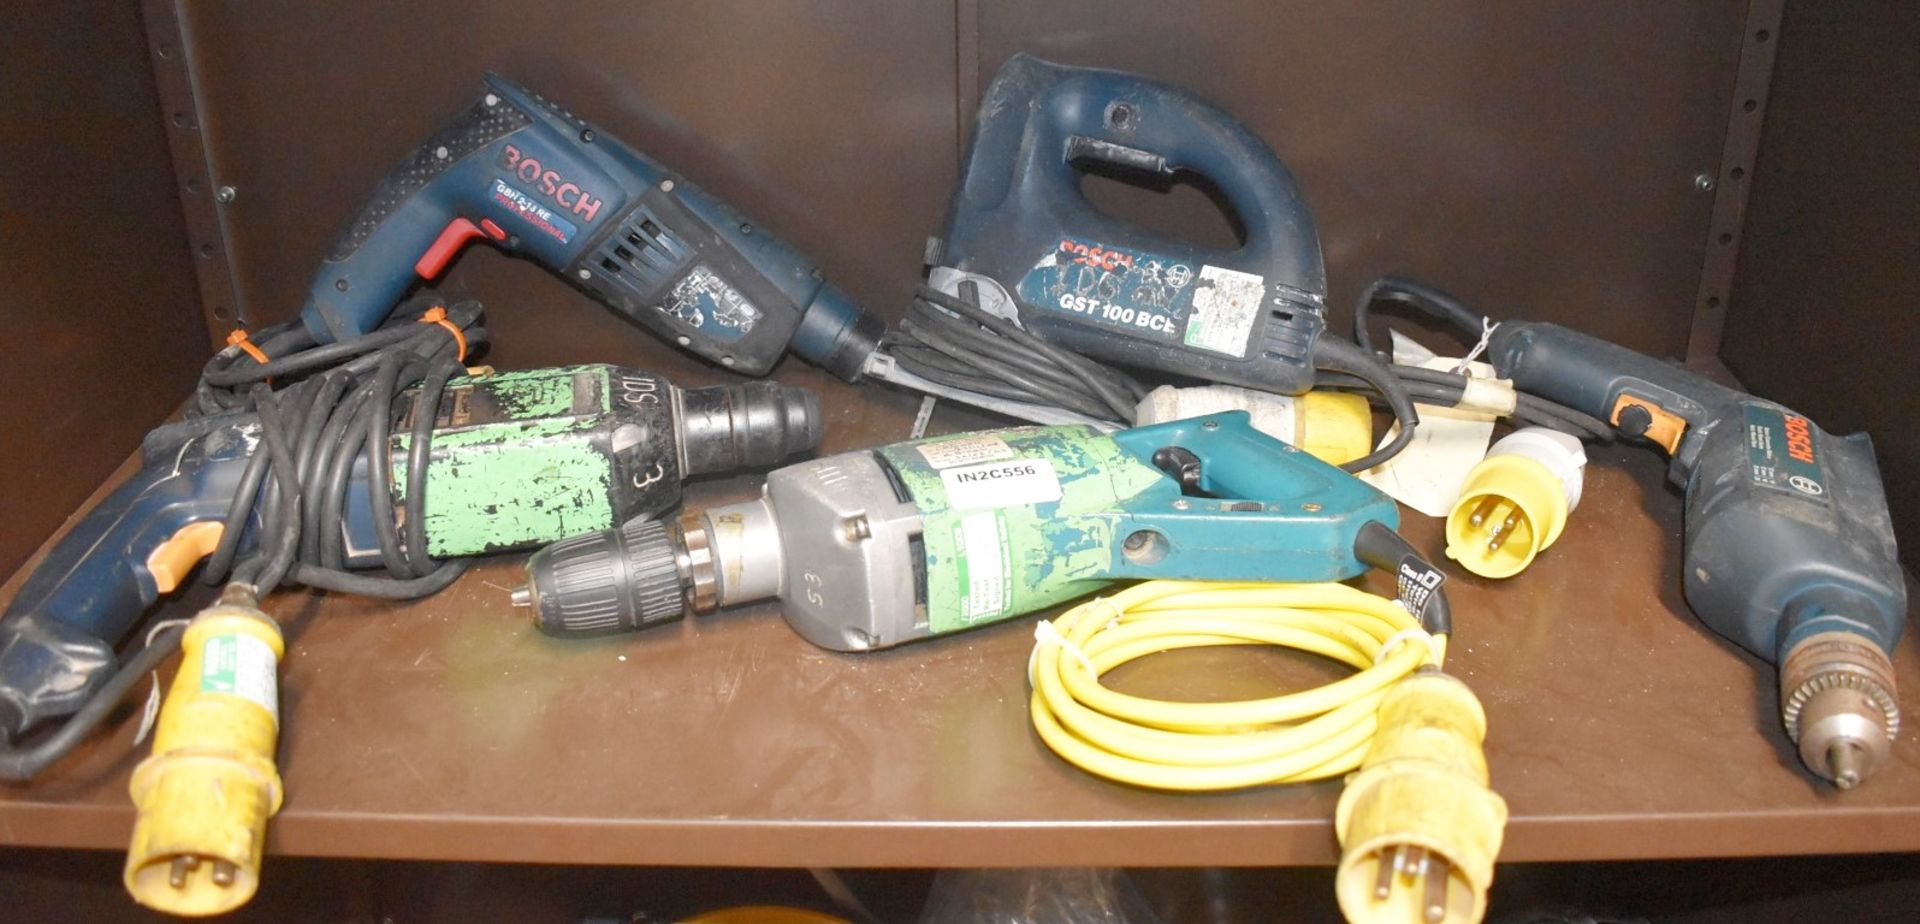 5 x Power Tools Including Saw and Drills - 110v - Image 2 of 8